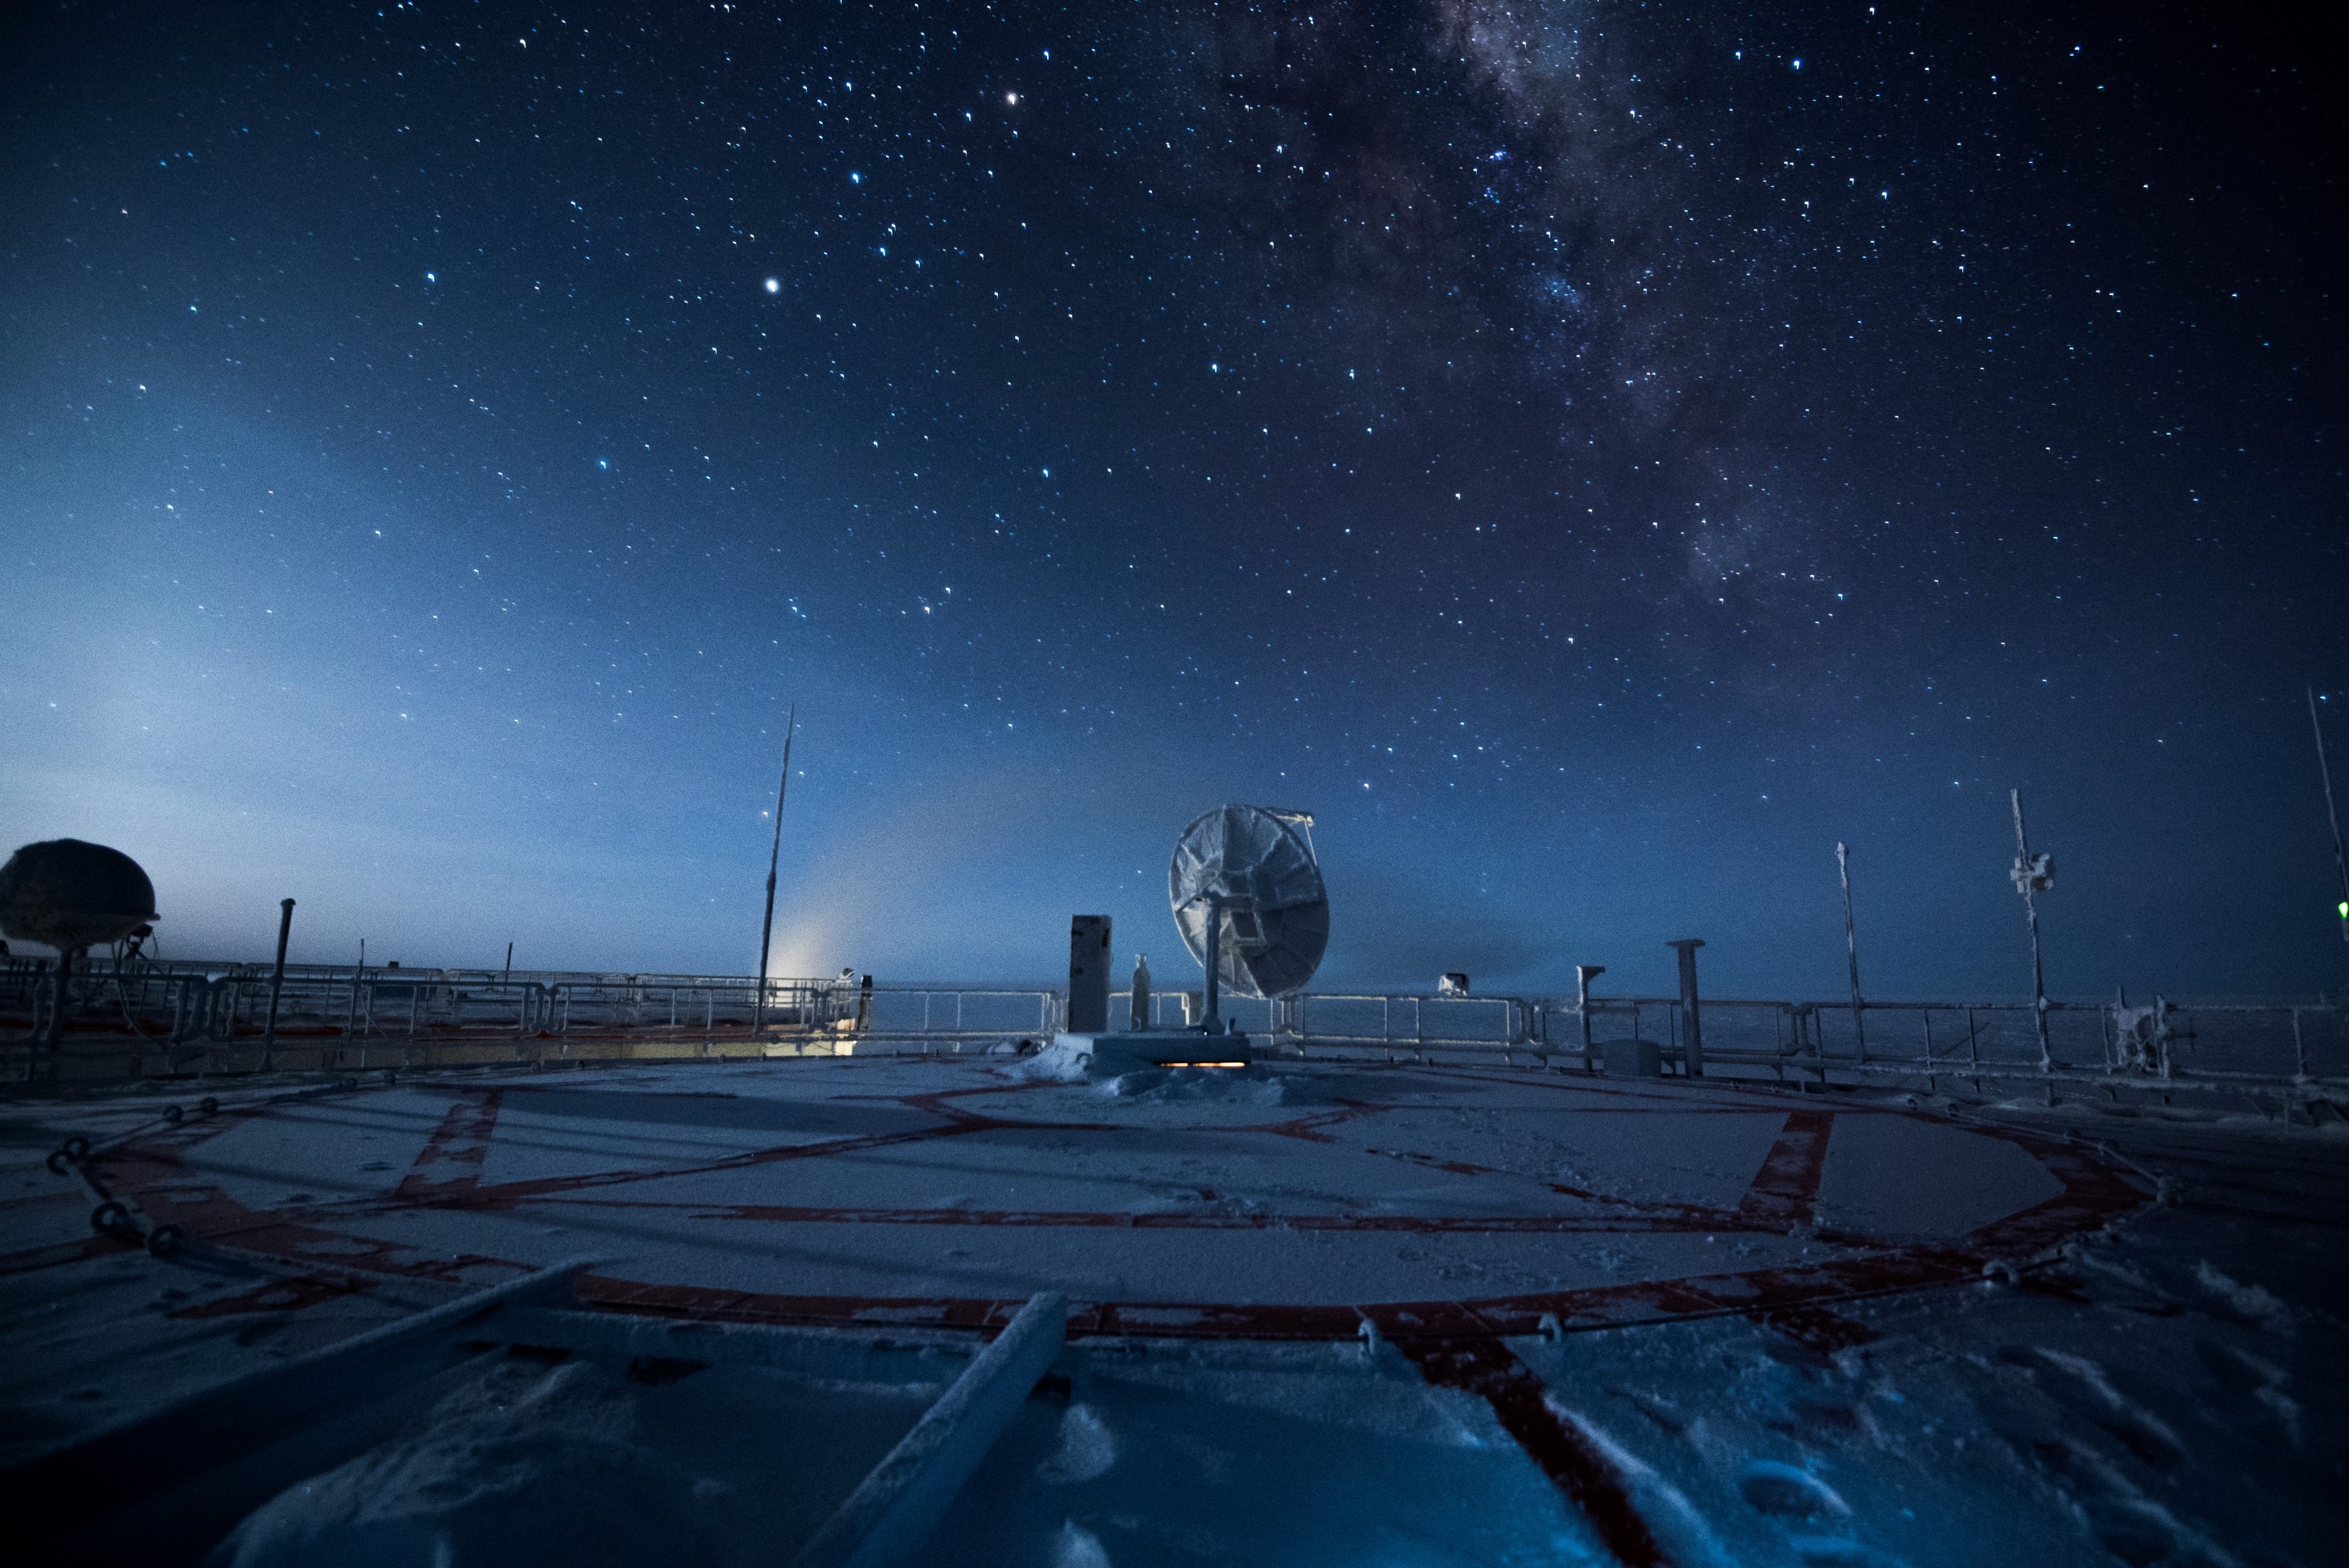 General 2914x1945 nature landscape clear sky night Concordia Research Station Antarctica snow ice Milky Way stars lights satellite technology science starry night